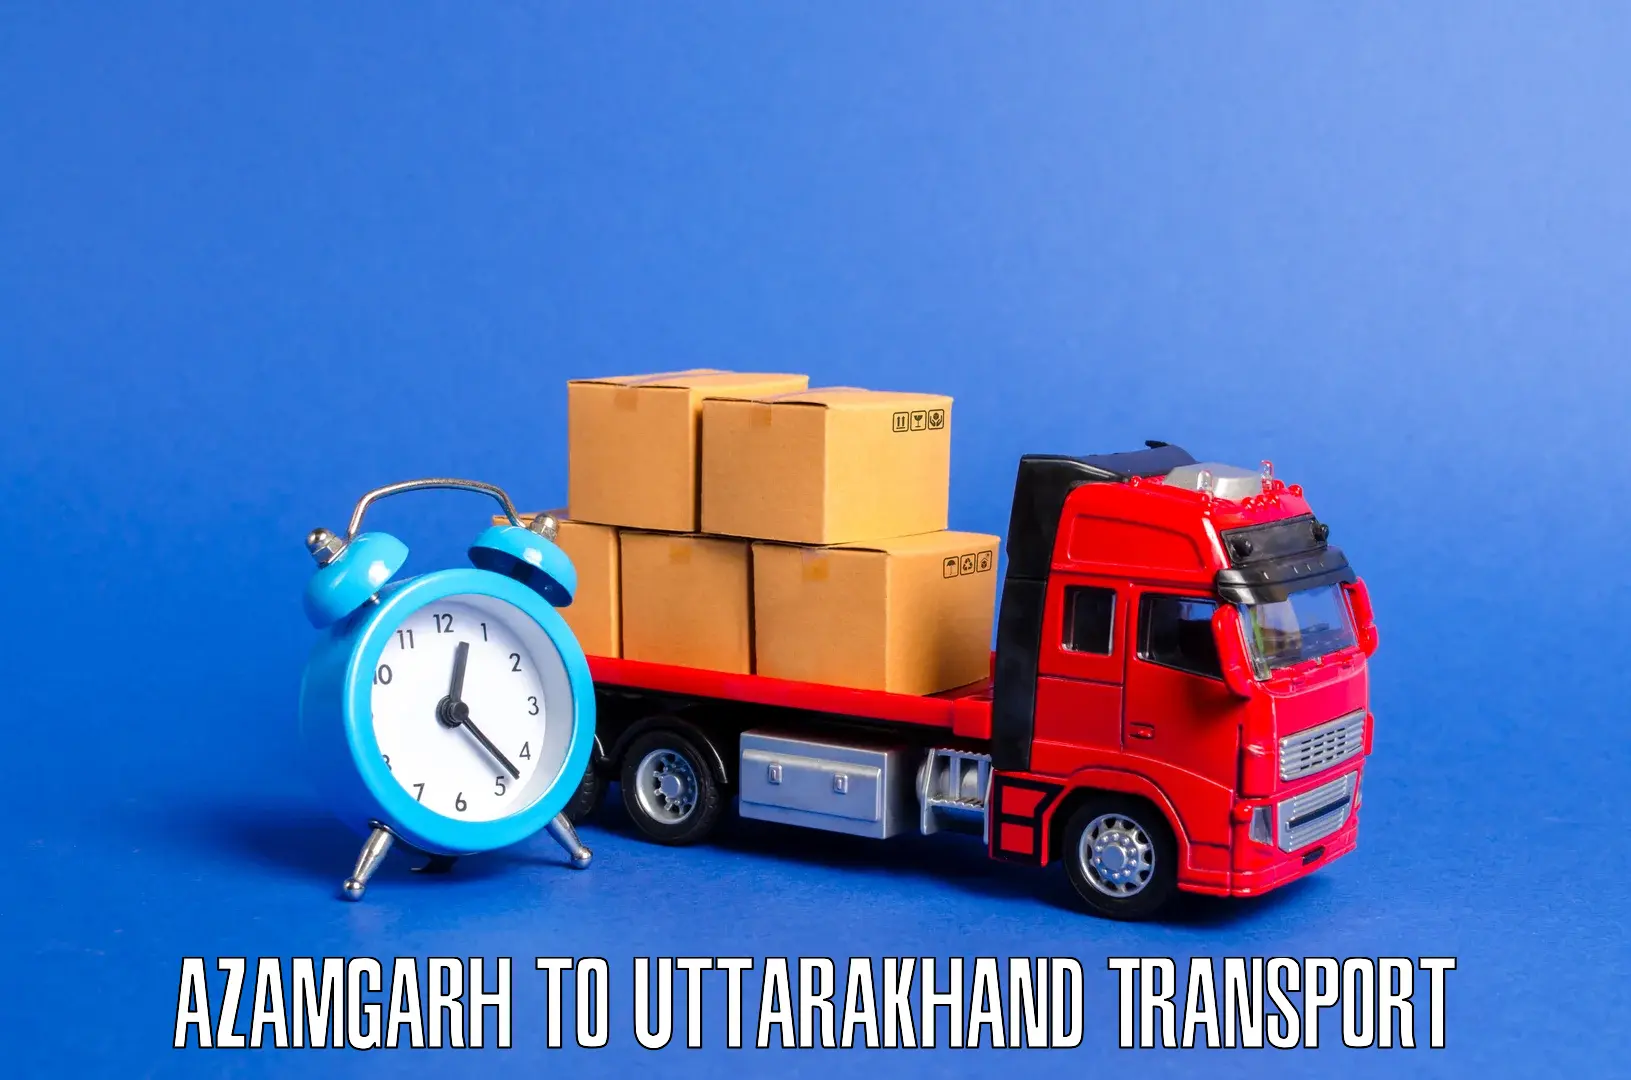 Container transport service Azamgarh to Dwarahat